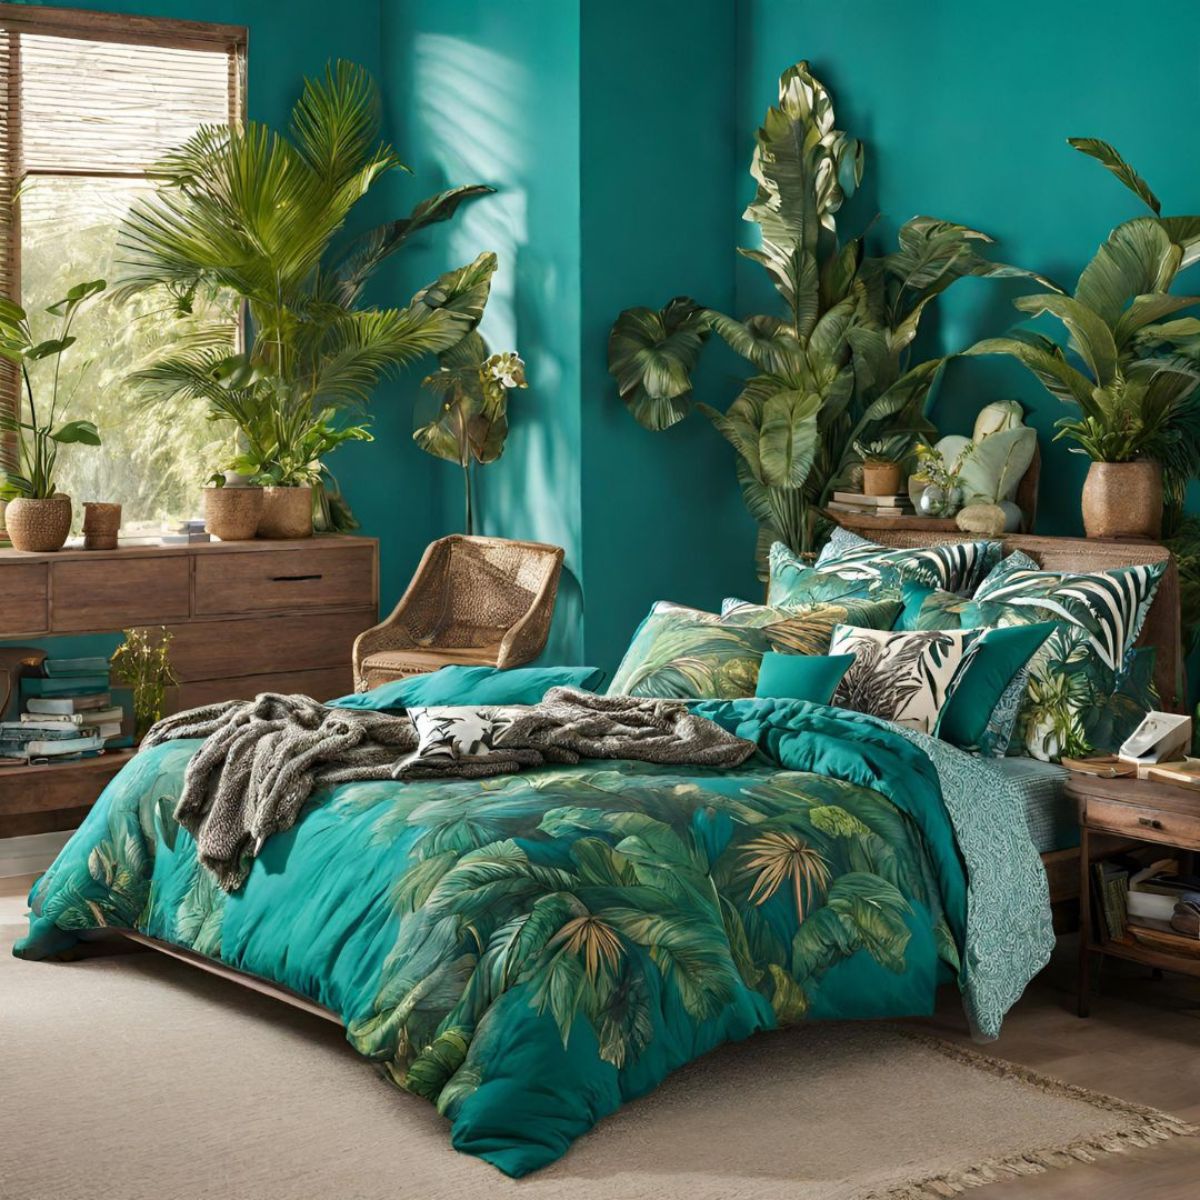 a teal bedroom with plants and jungle-printed blankets and pillows